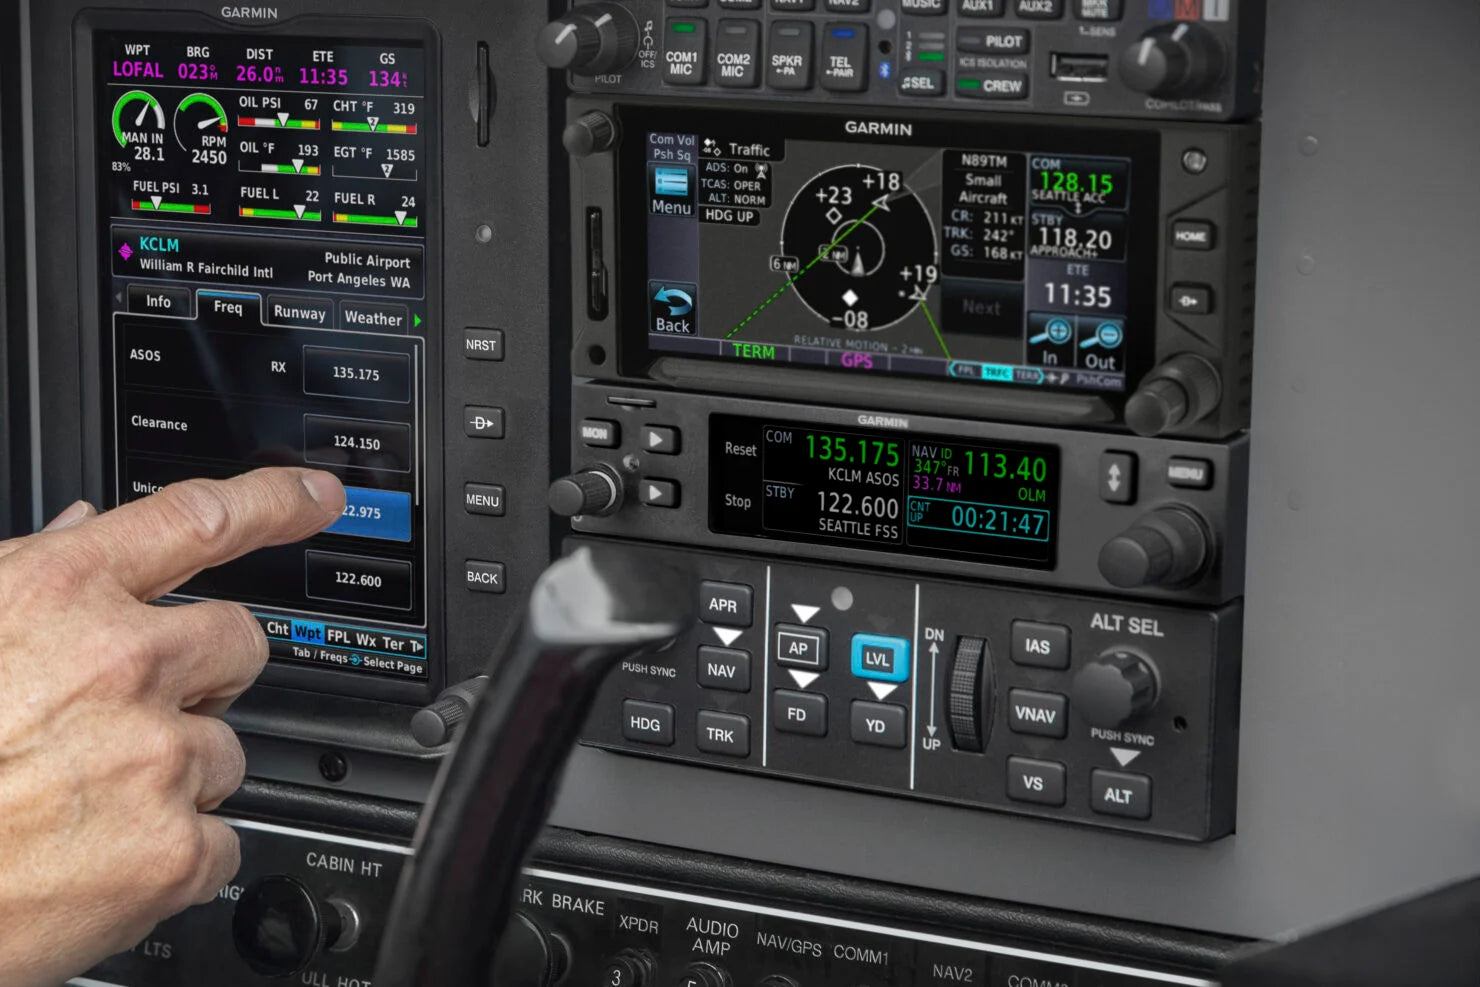 Garmin's Latest Innovations: The GTR 205 and GNC 215 Radios - Elevating Aviation Communication and Navigation